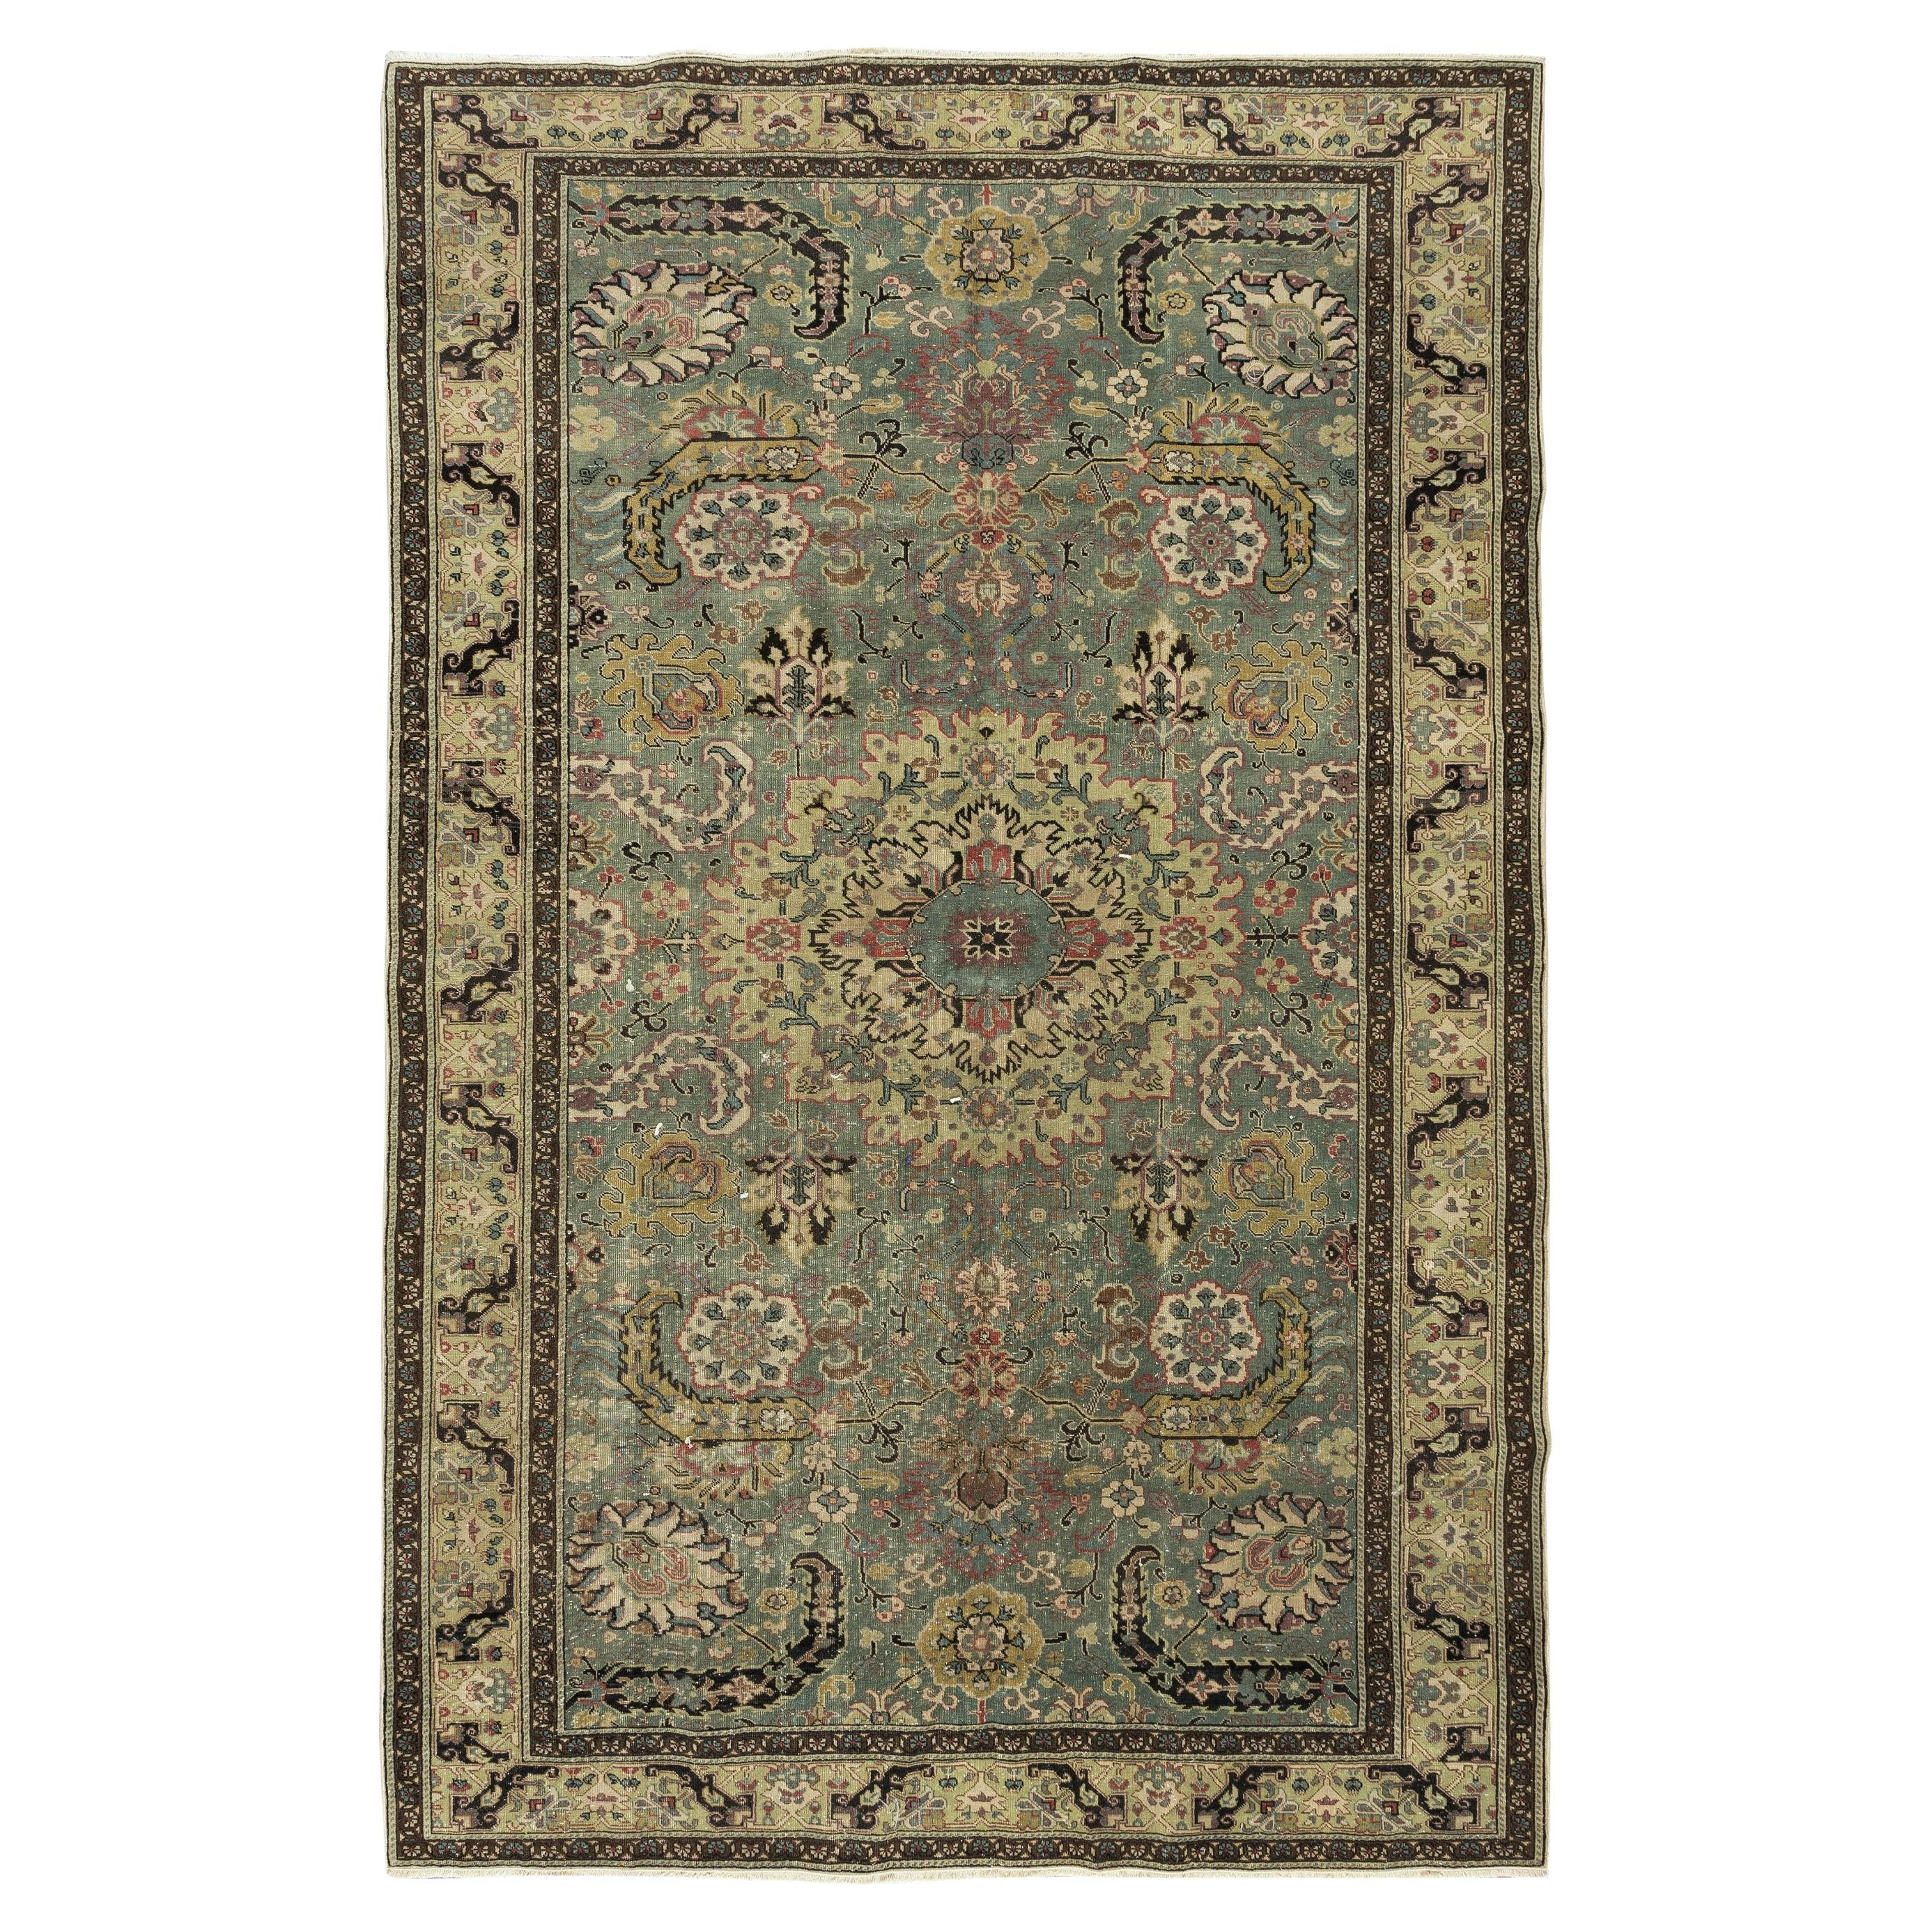 6.3x10 Ft Semi Antique Turkish Area Rug. Finely Handknotted Wool Oriental Carpet For Sale